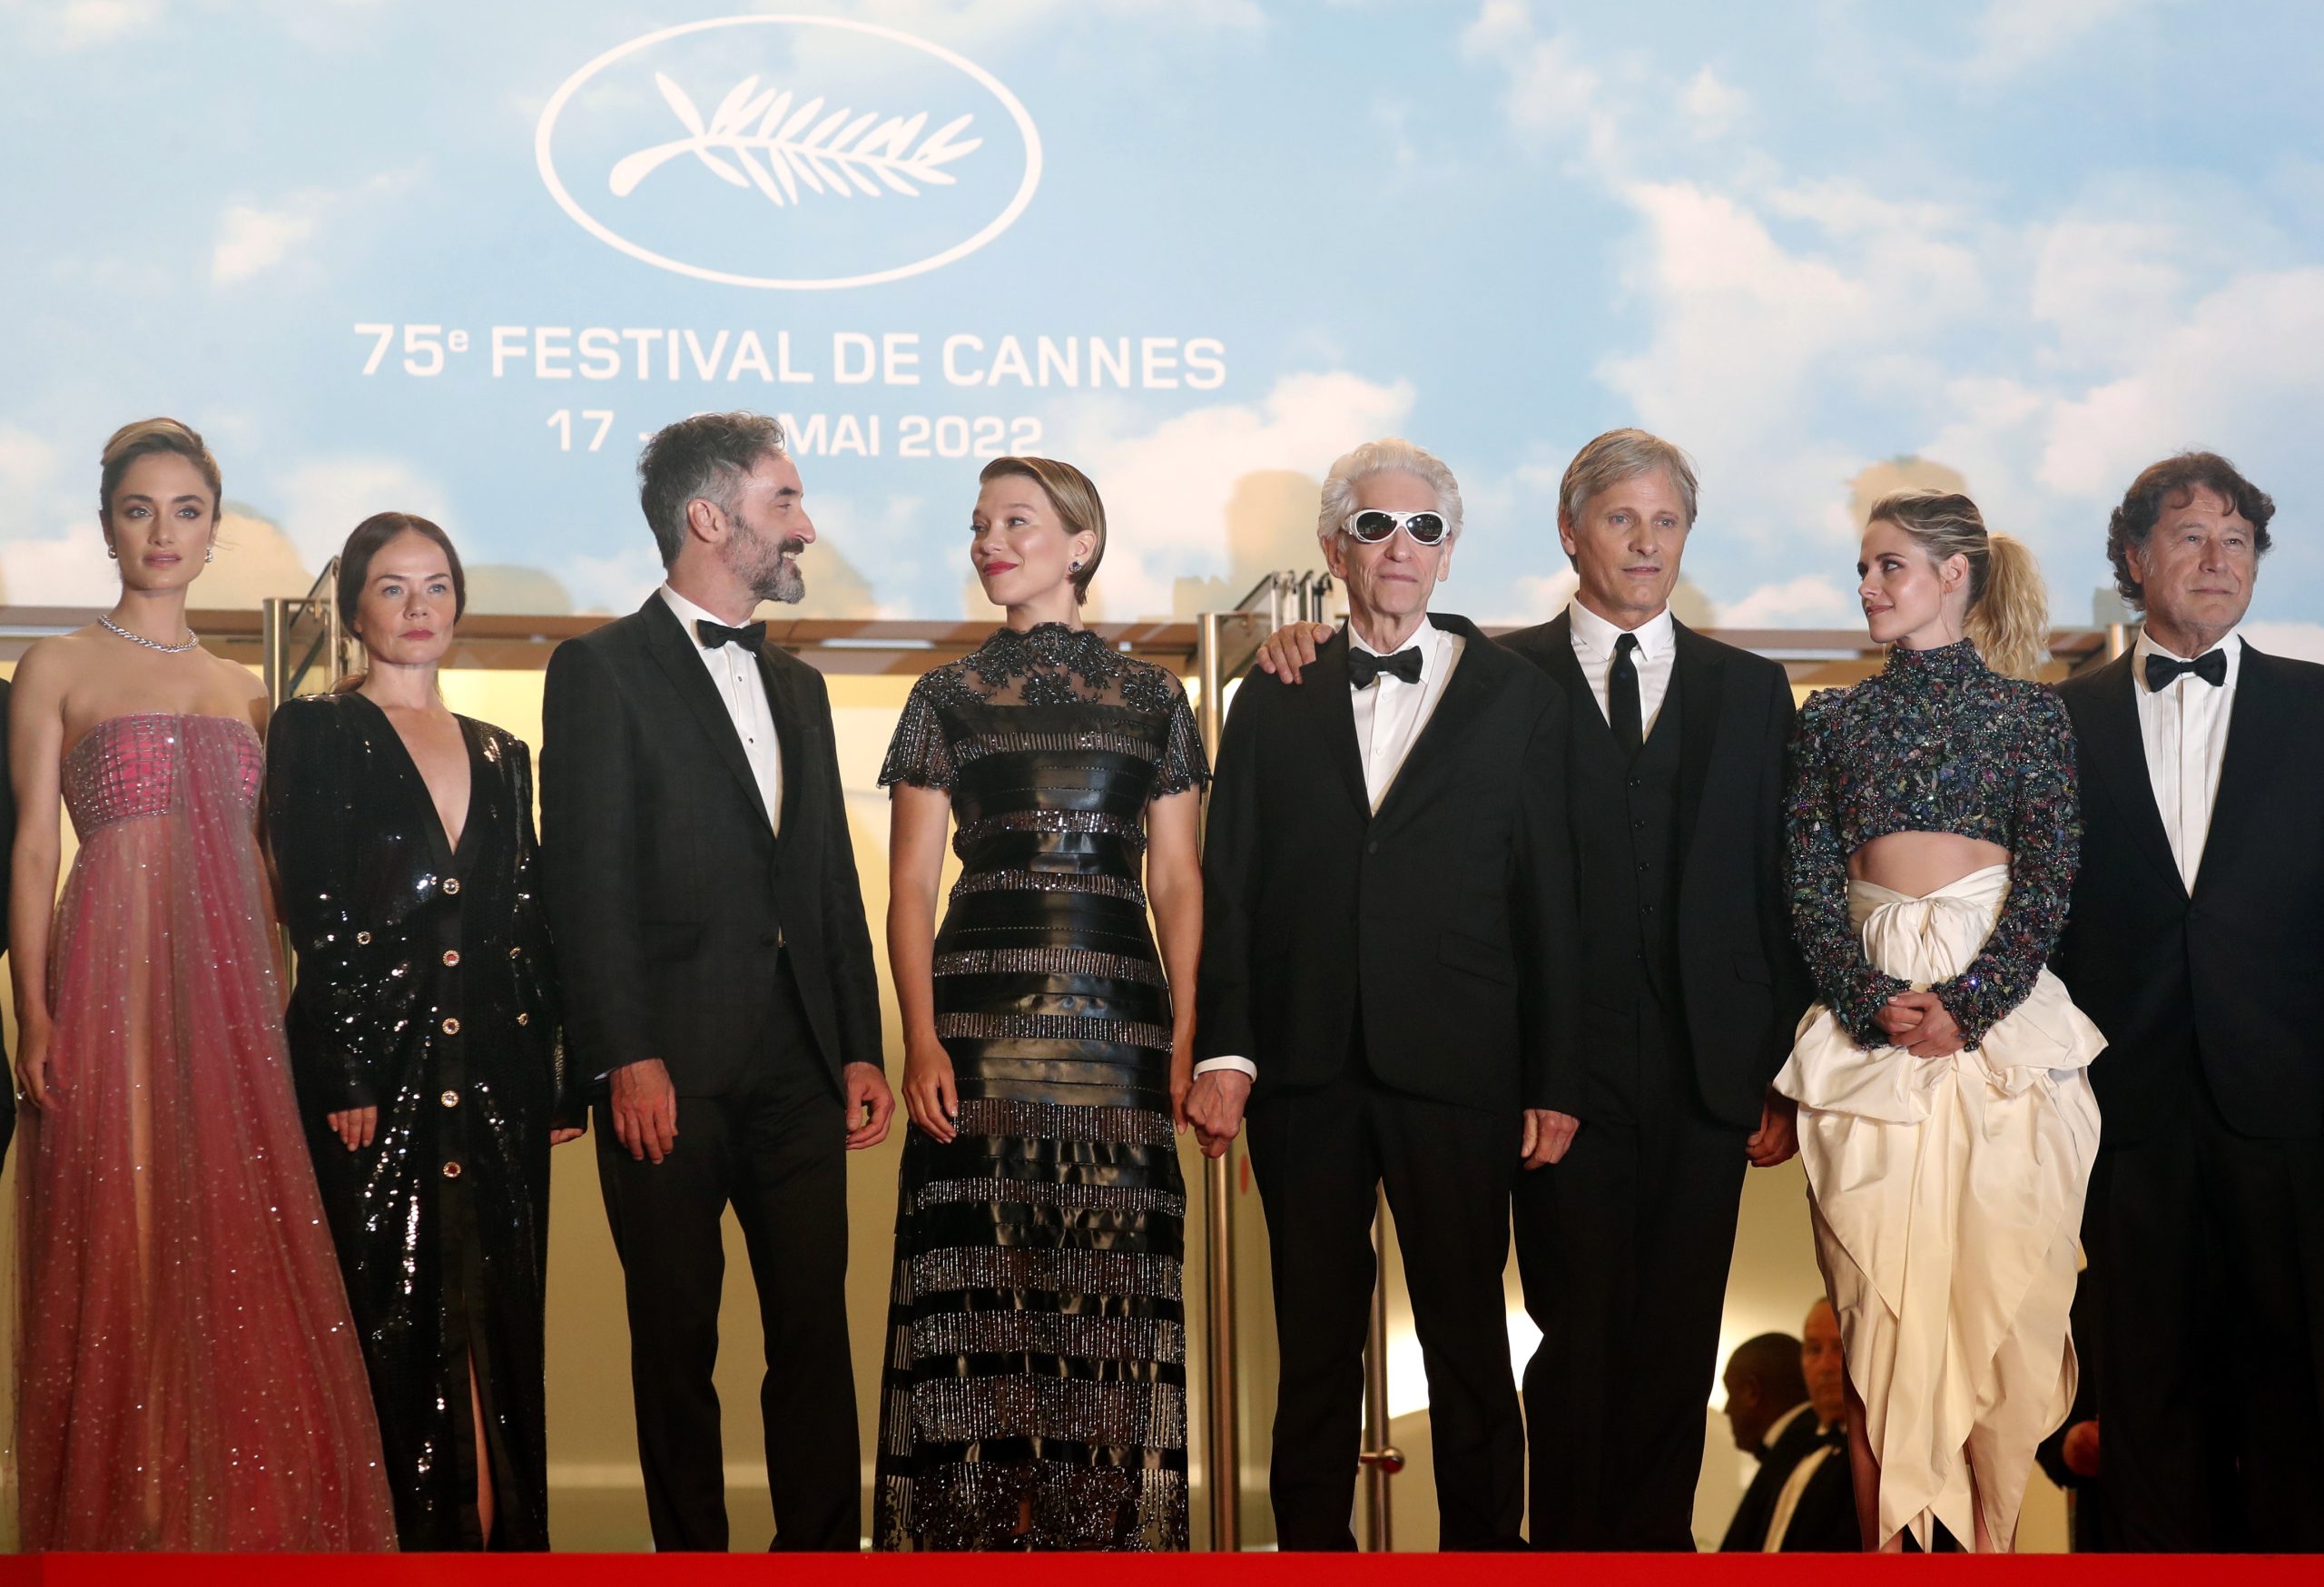 epa09970438 (L-R) Denise Capezza, Nadia Litz, Don McKellar, Lea Seydoux, David Cronenberg, Viggo Mortensen, Kristen Stewart, and Robert Lantos arrive for the screening of 'Crimes of the Future' during the 75th annual Cannes Film Festival, in Cannes, France, 23 May 2022. The movie is presented in the Official Competition of the festival which runs from 17 to 28 May.  EPA/GUILLAUME HORCAJUELO